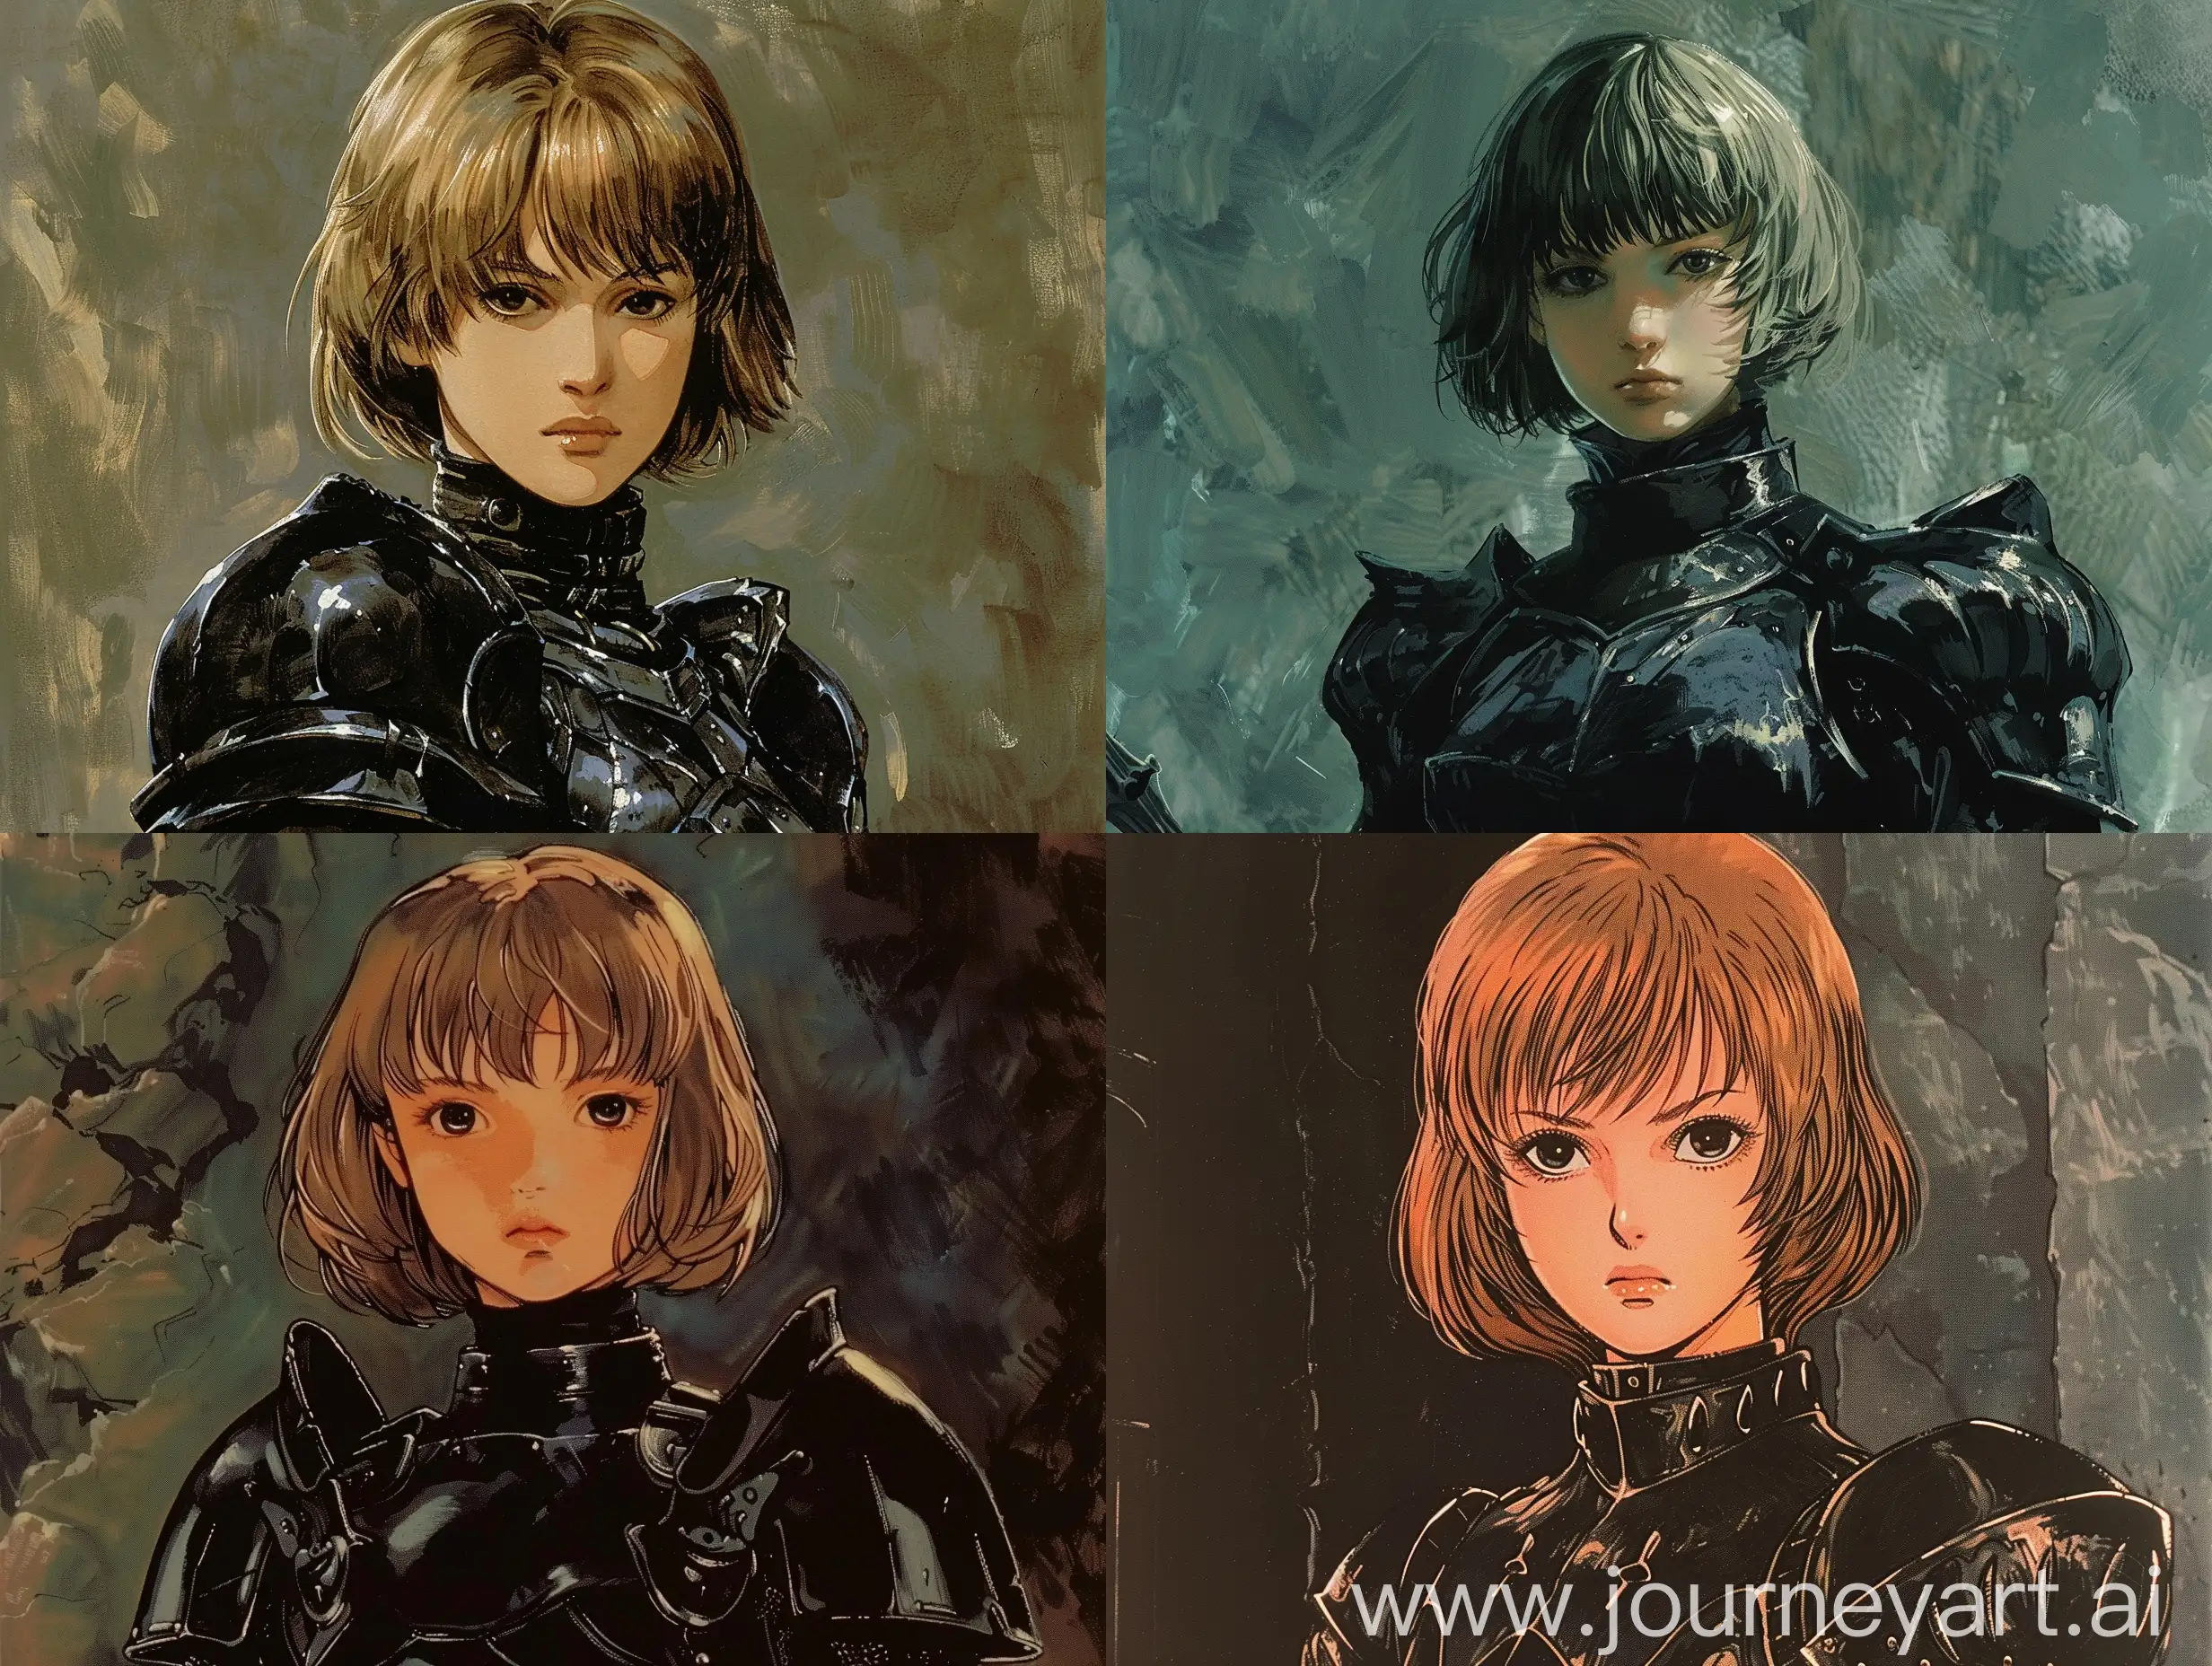 screenshot from the dvd of the Dark Souls fantasy illustration from the 1987s. Artistic illustration of a girl with short, chin-length blonde hair. Her armor is made of black leather. screenshot from the 1987 Dark Souls fantasy book illustration DVD.